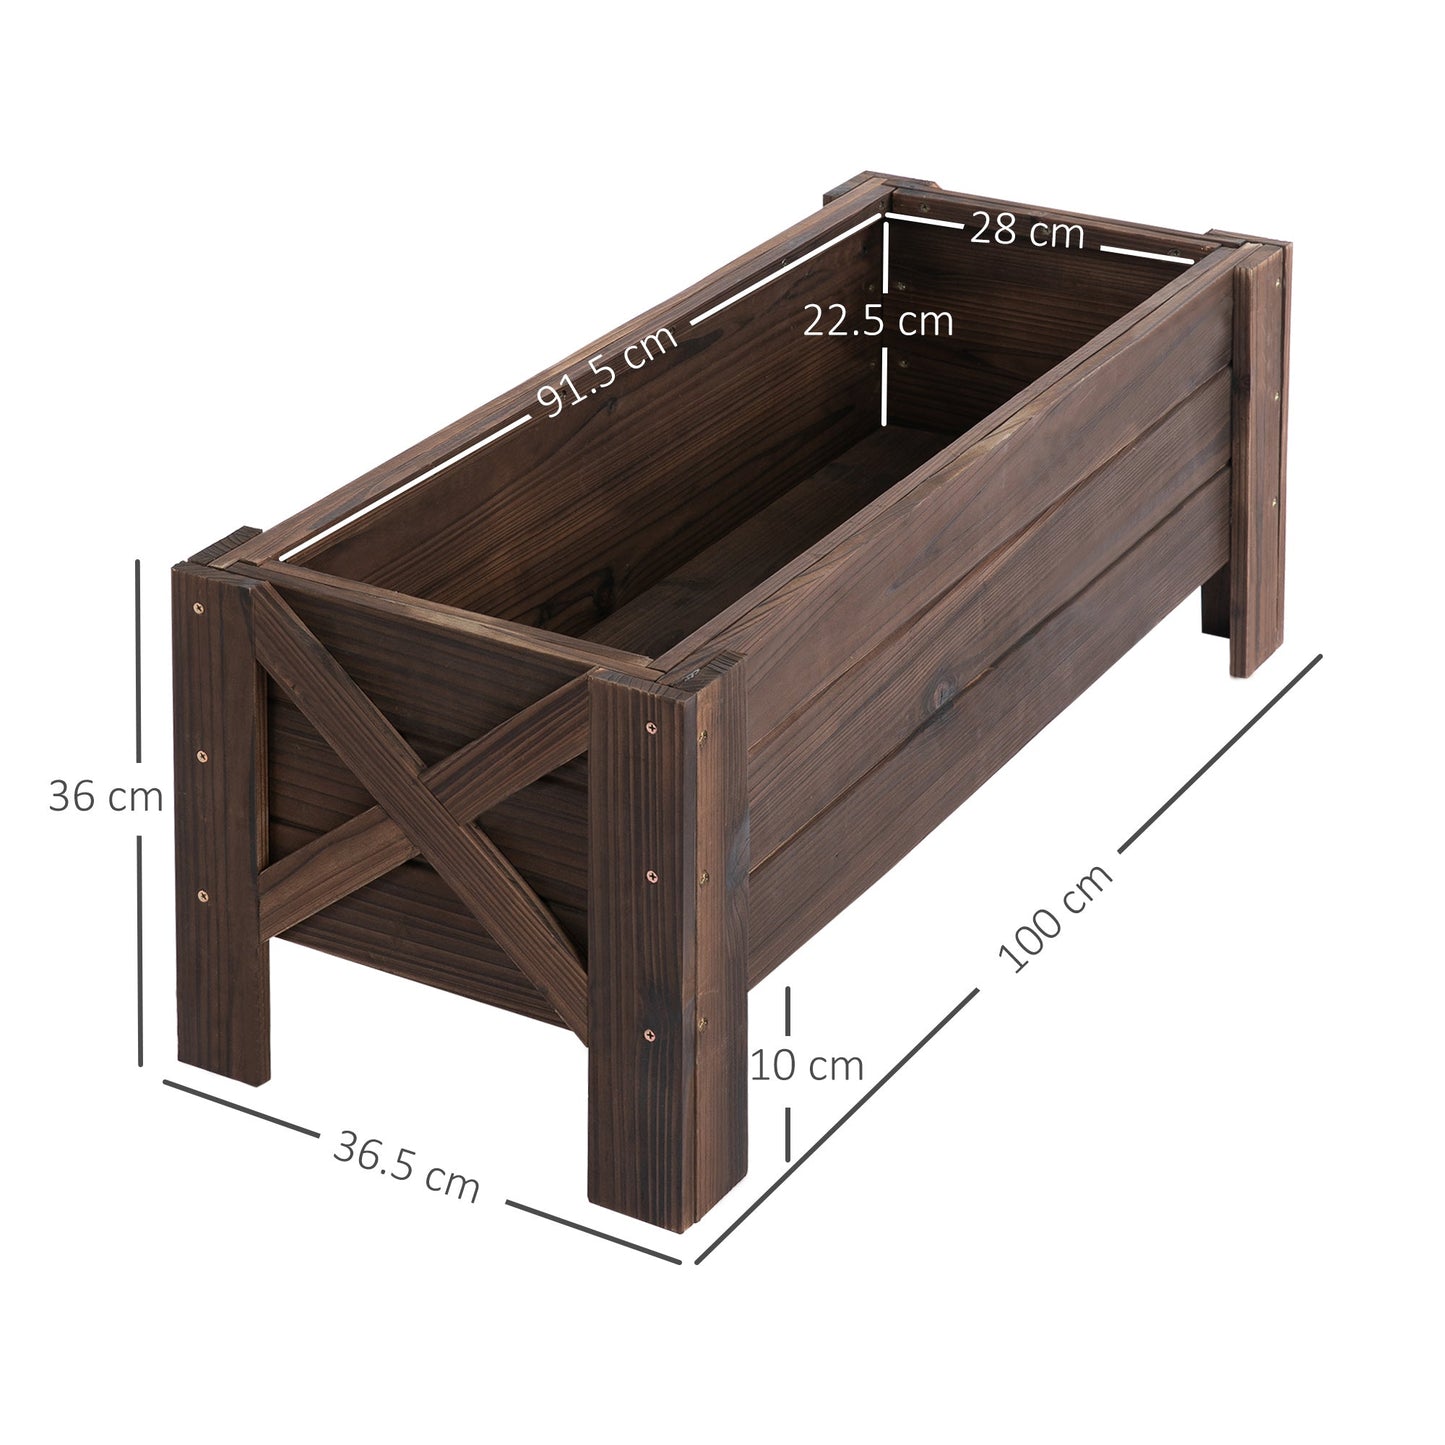 Outsunny Garden Raised Bed Planter Grow Containers for Outdoor Patio Plant Flower Vegetable Pot Fir Wood, 100 x 36.5 x 36 cm